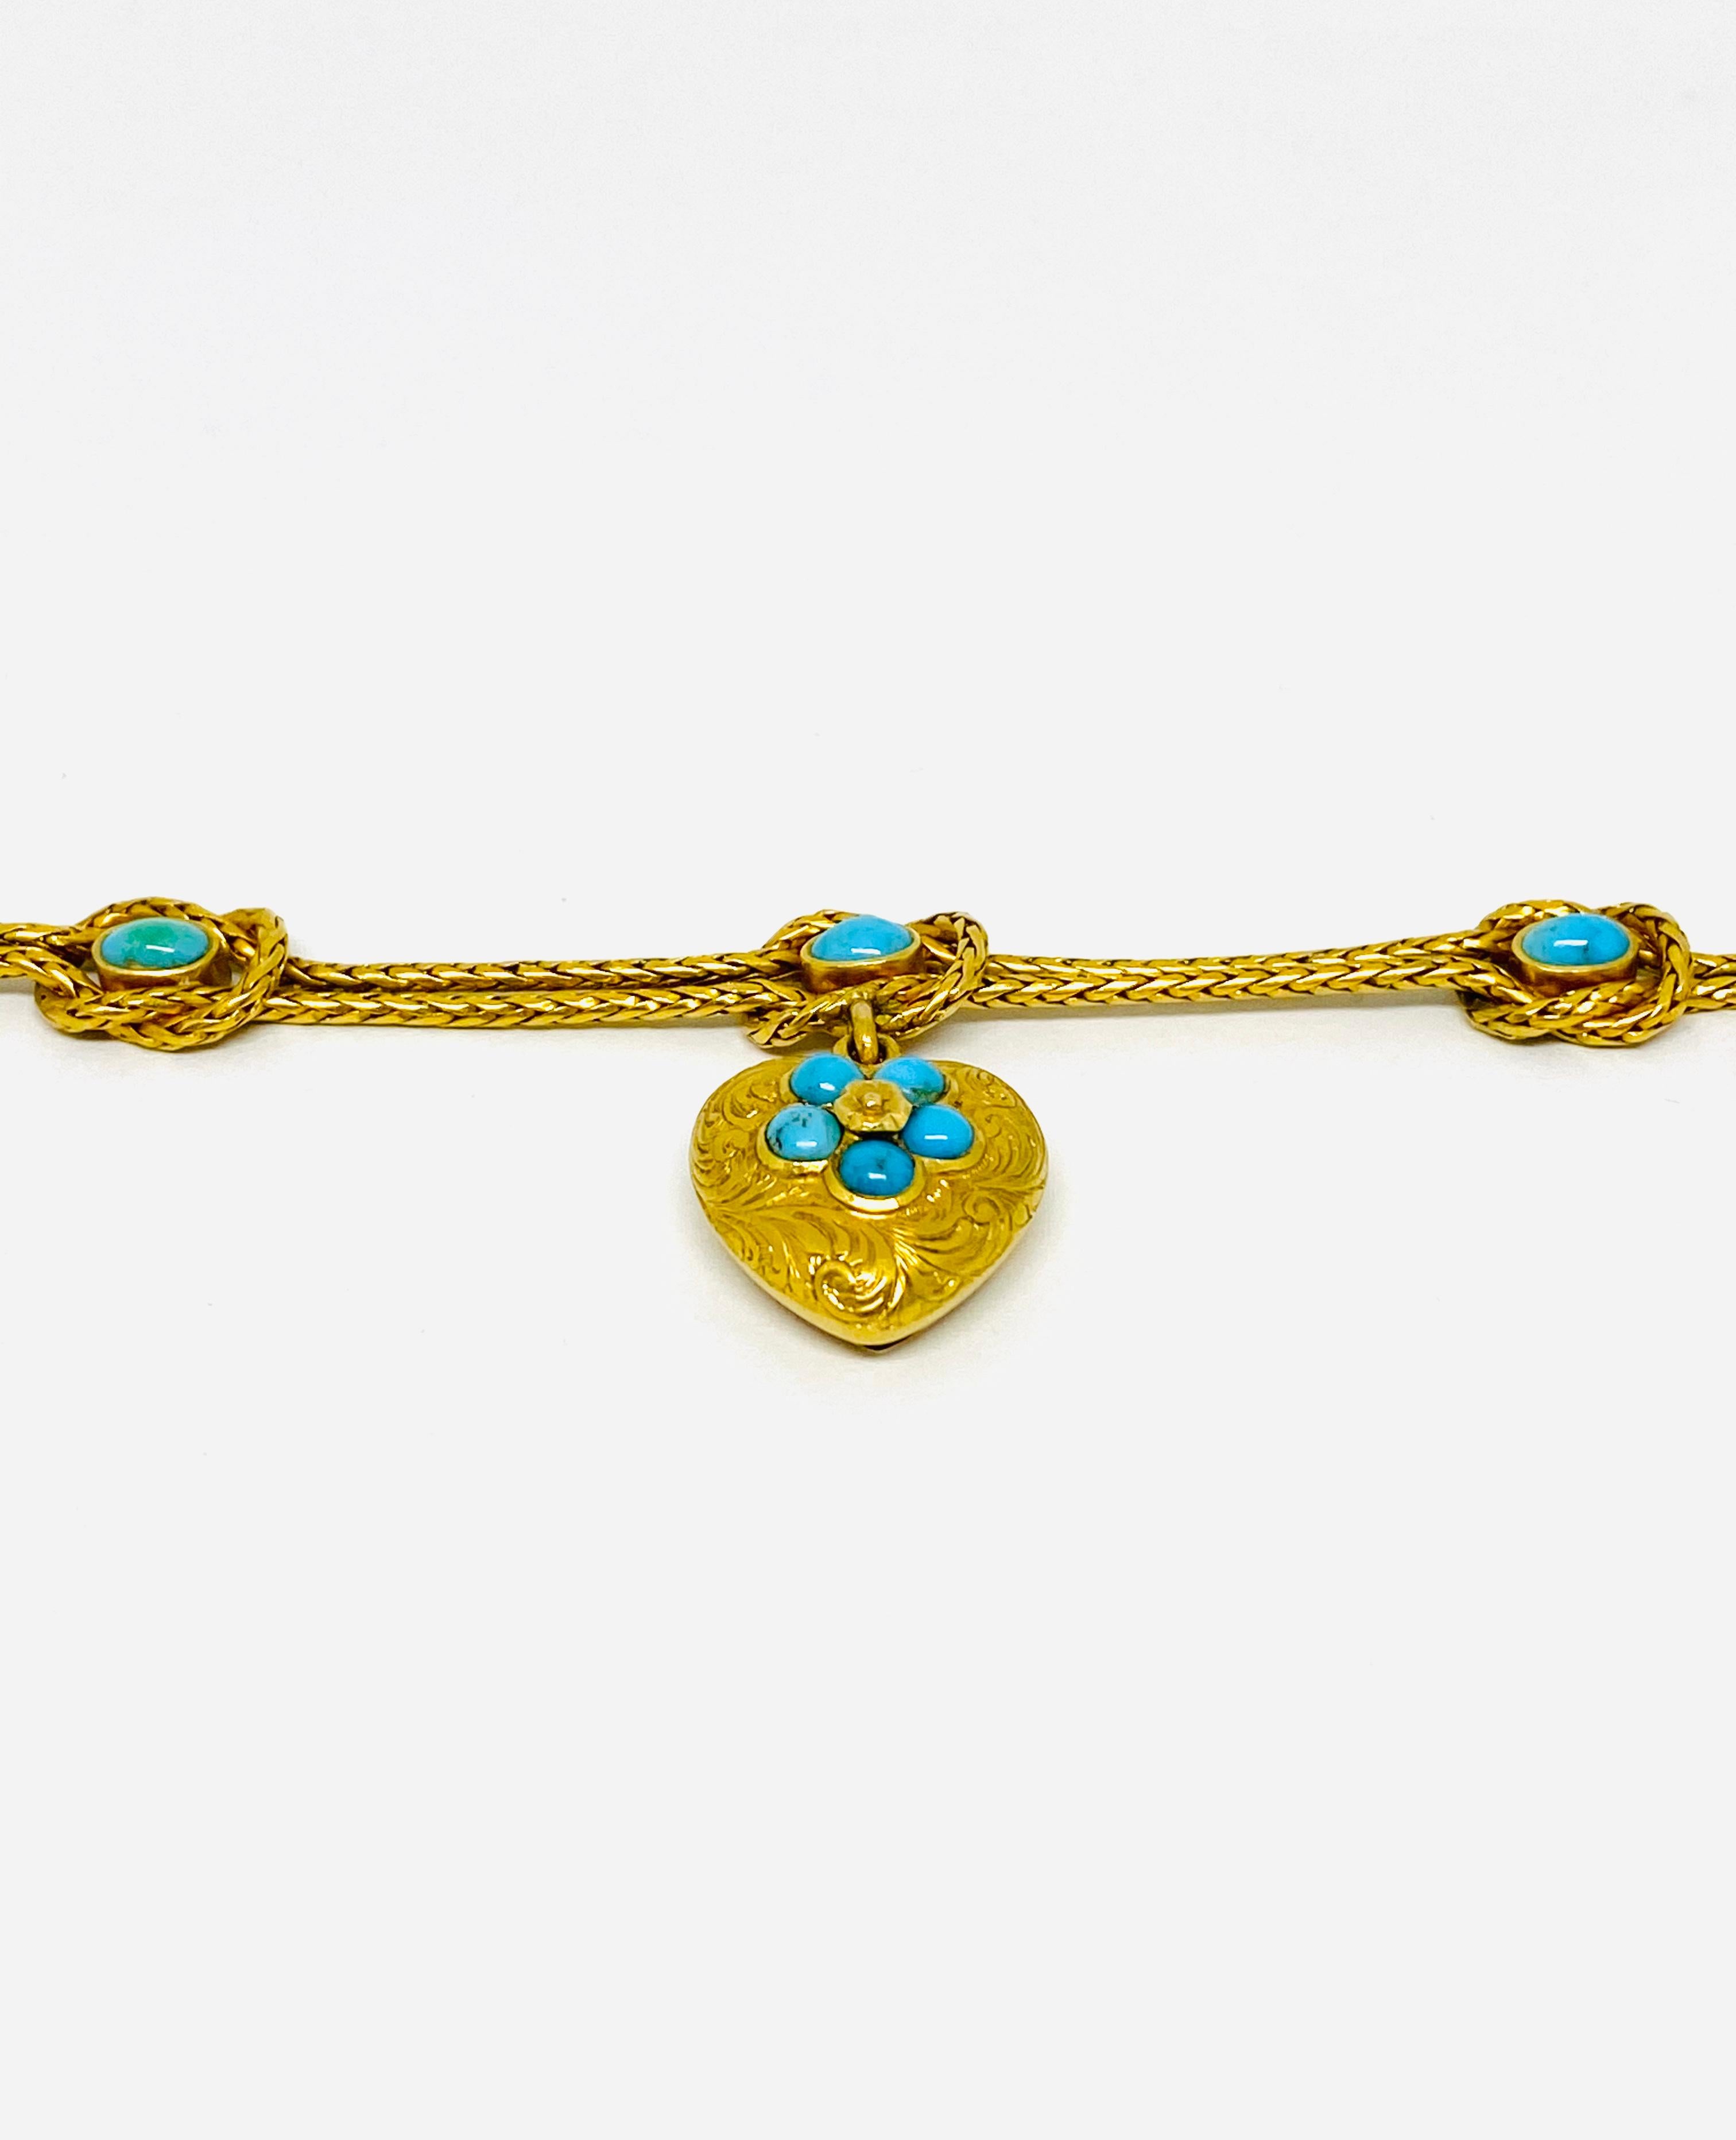 Victorian Antique Yellow Gold and Turquoise Bracelet w/ Heart Charm 